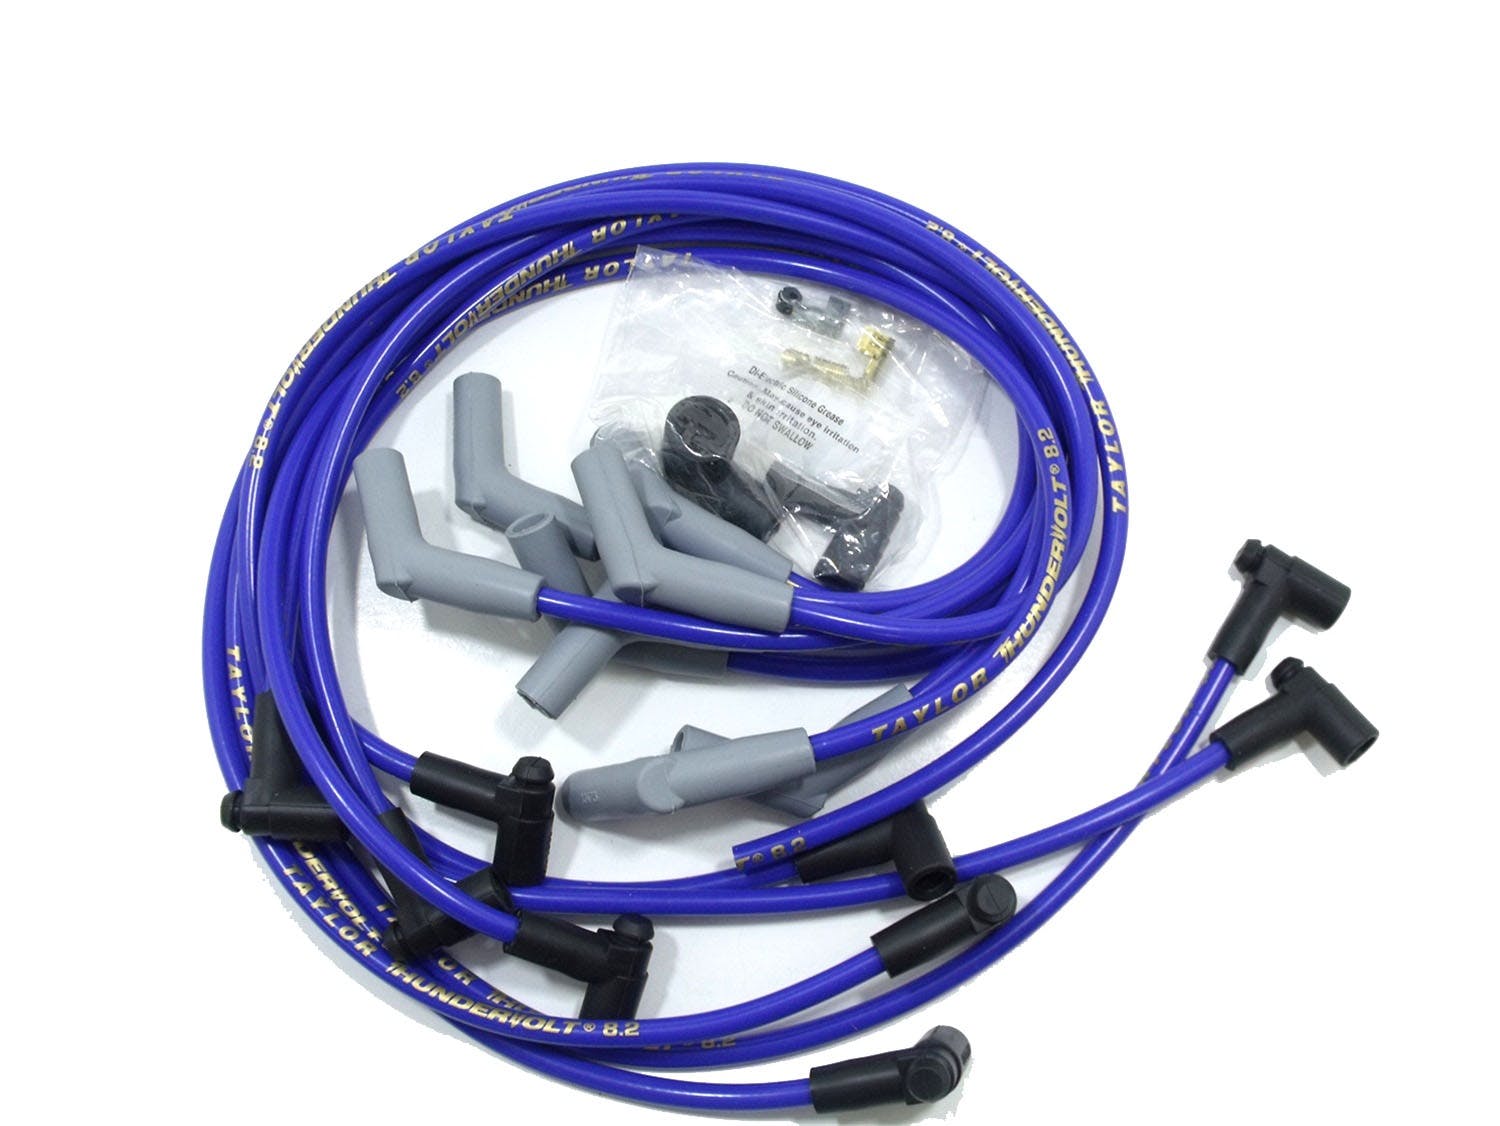 Taylor Cable Products 86632 Thundervolt 8.2 race fit 8 cyl blue